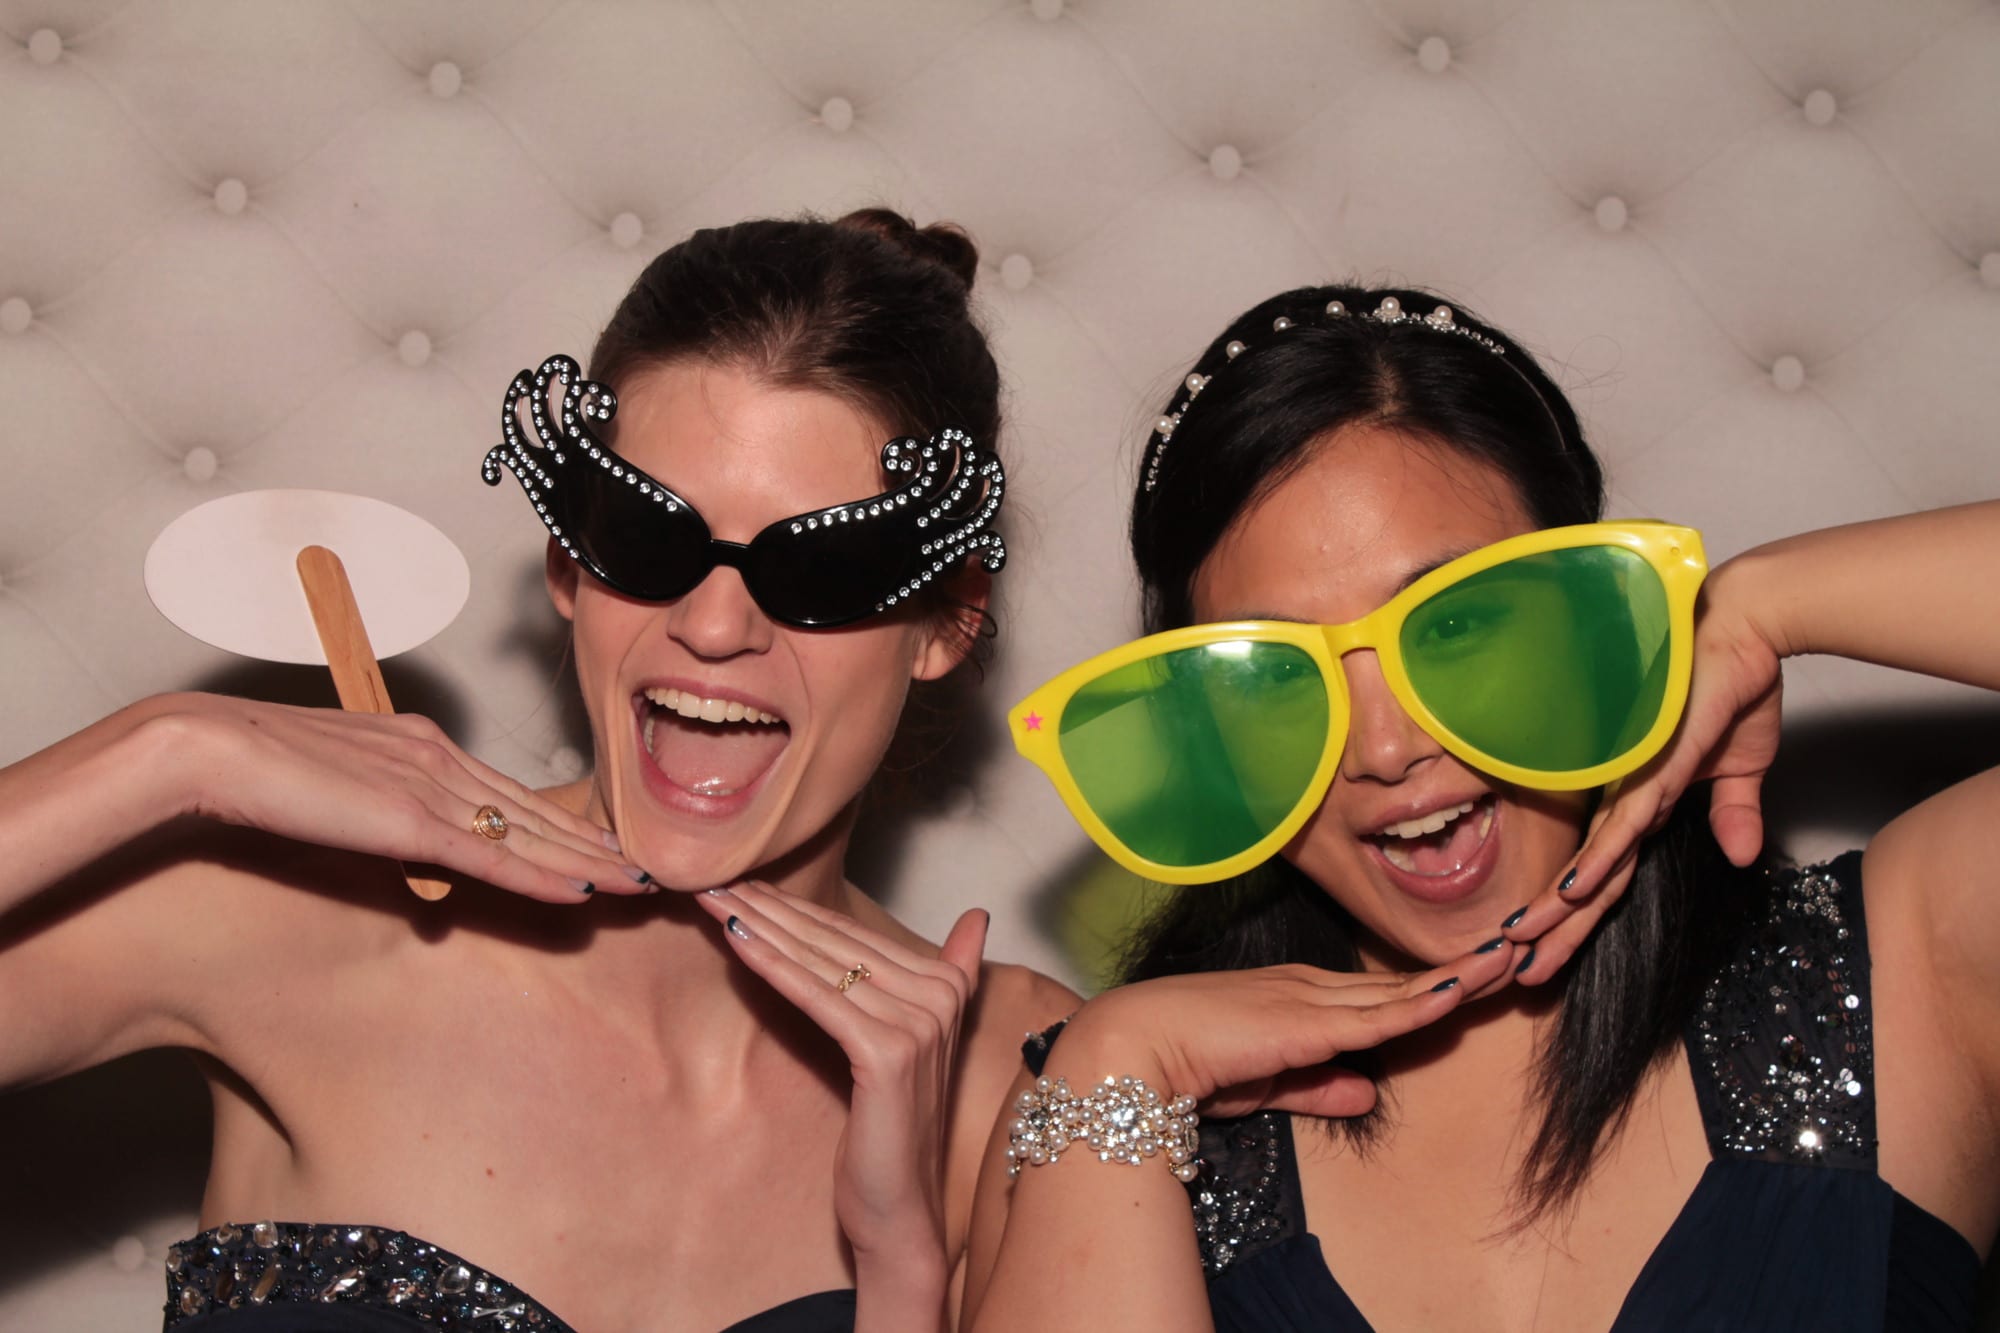 Photo-Booth-Rental-Wedding-Reception-Party-Celebration-Fun-No. 1-Props-LGBT-Affordable-Best-Austin